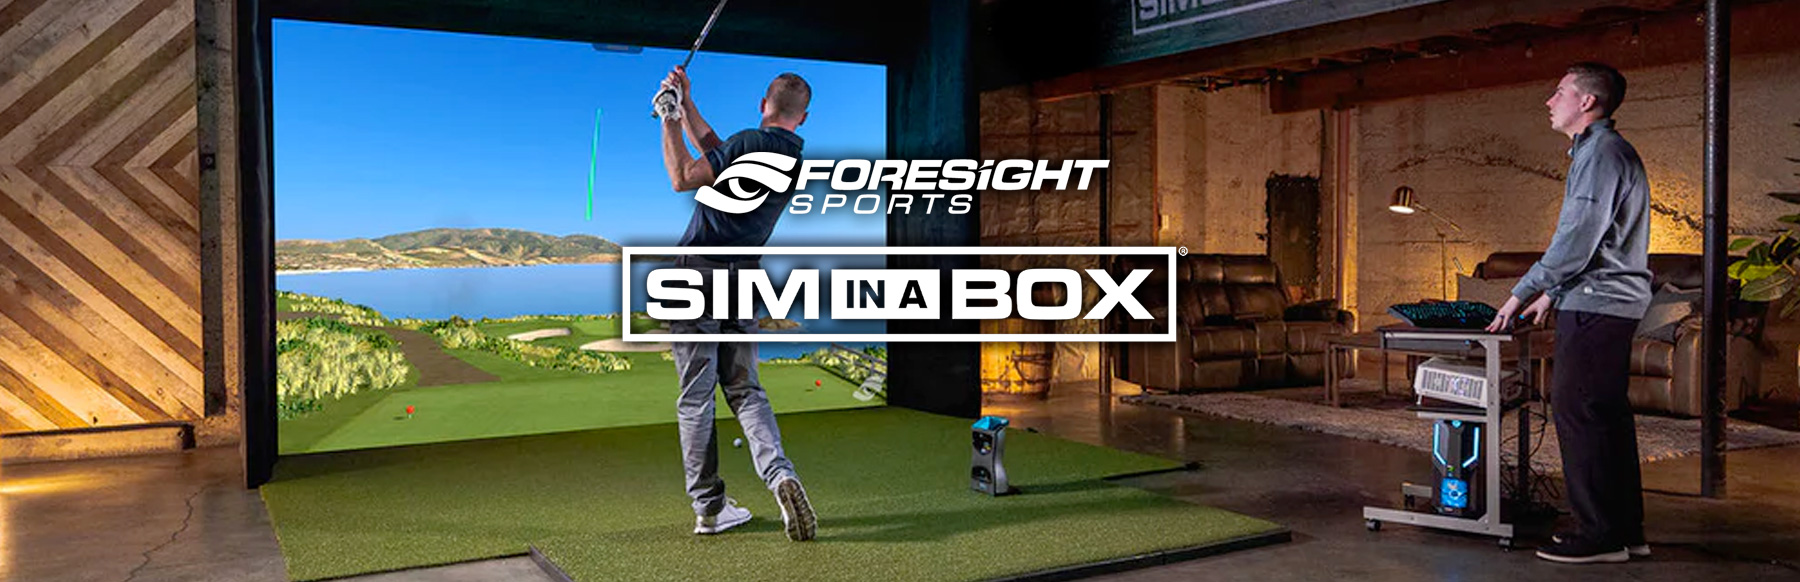 Sim-in-a-Box Packages by Foresight Sports – Ace Indoor Golf